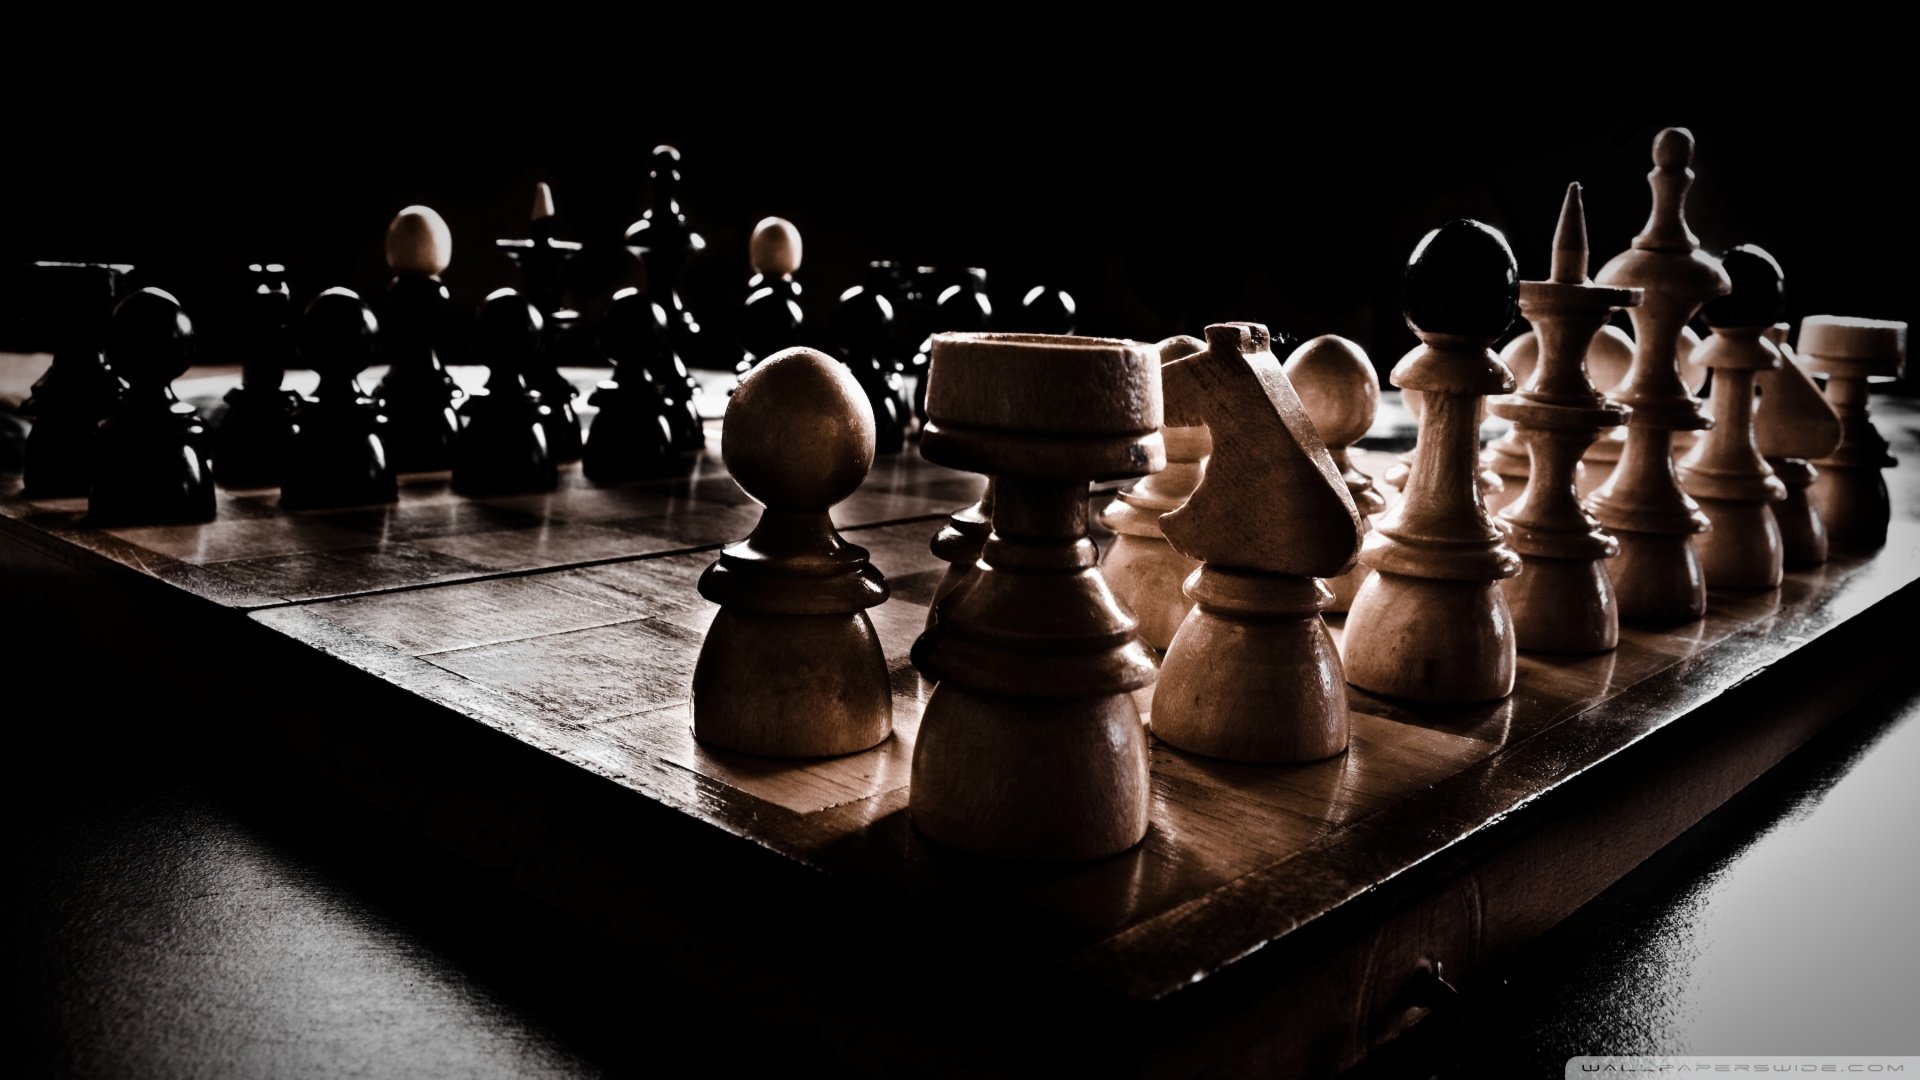  Chess Wallpaper Hd in the world Don t miss out 